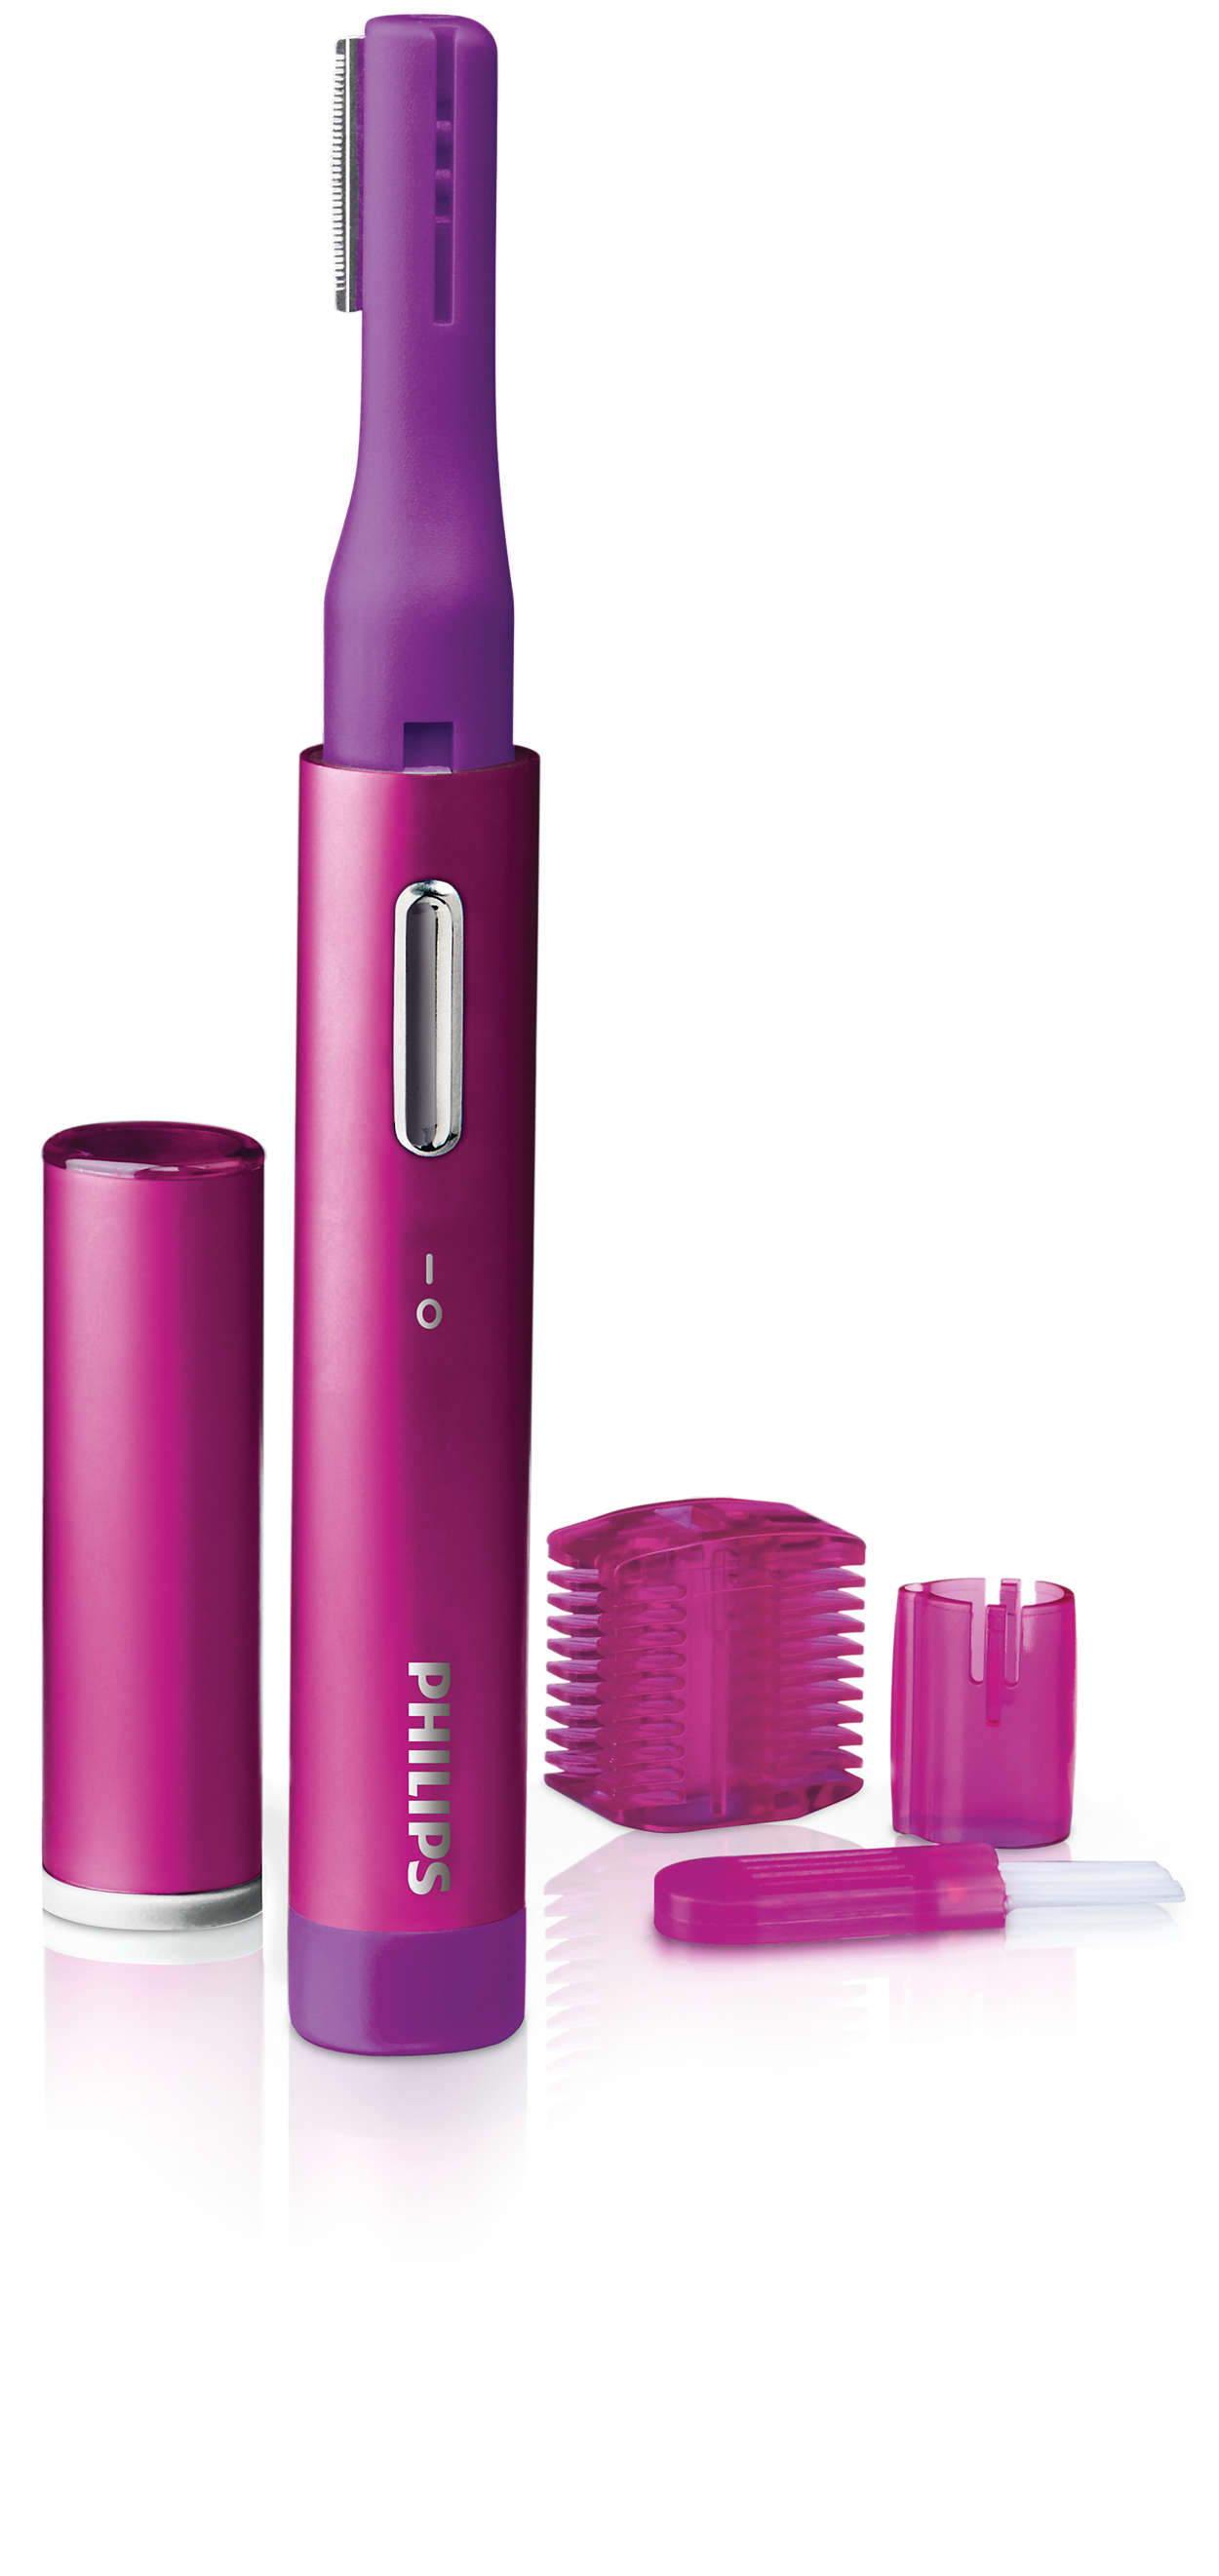 sædvanligt pause snap Precision trimmer HP6390/51 | Philips